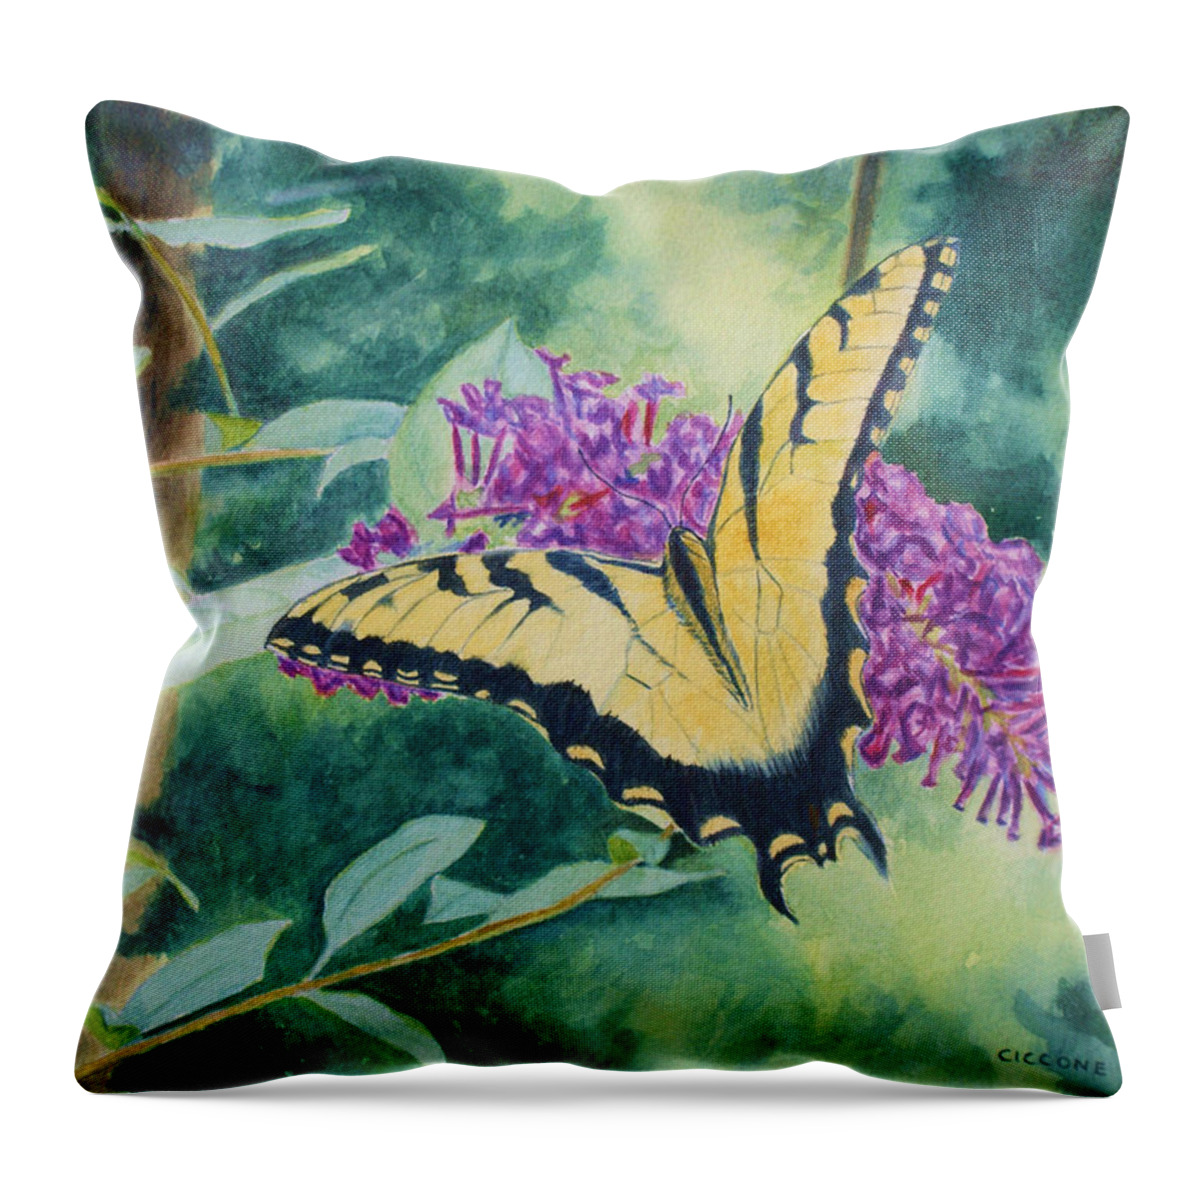 Butterfly Throw Pillow featuring the painting Butterfly Bush by Jill Ciccone Pike